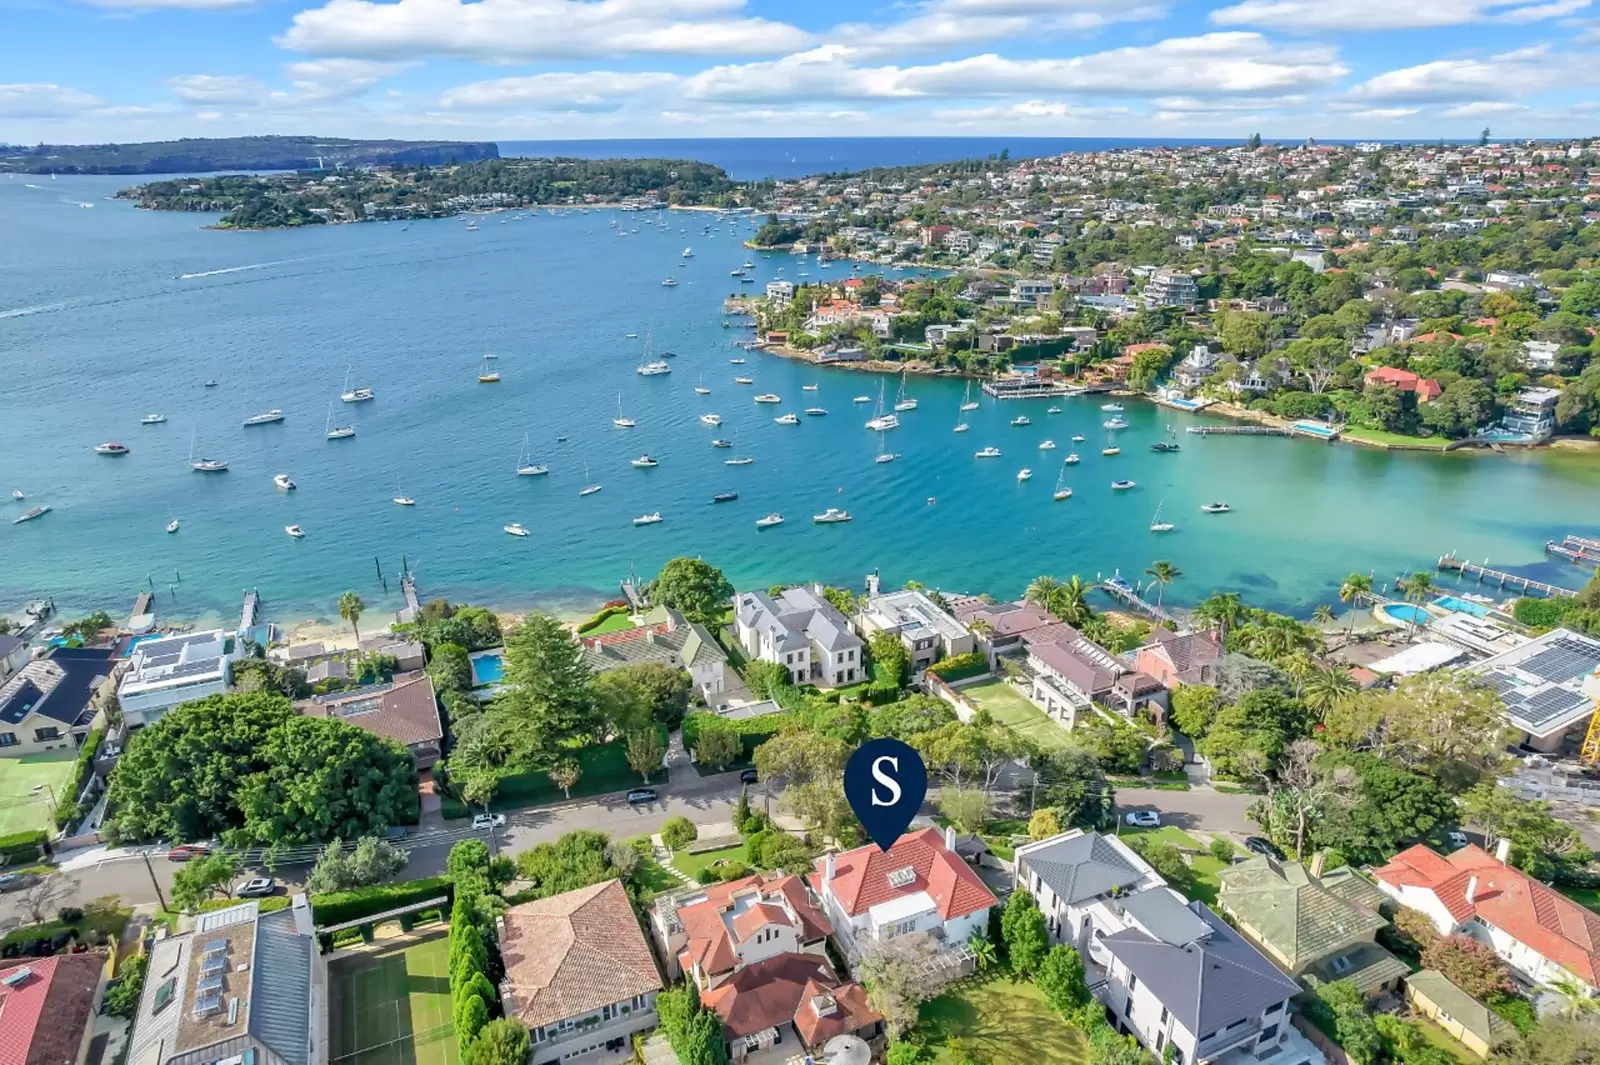 Photo #26: 40 Coolong Road, Vaucluse - Sold by Sydney Sotheby's International Realty